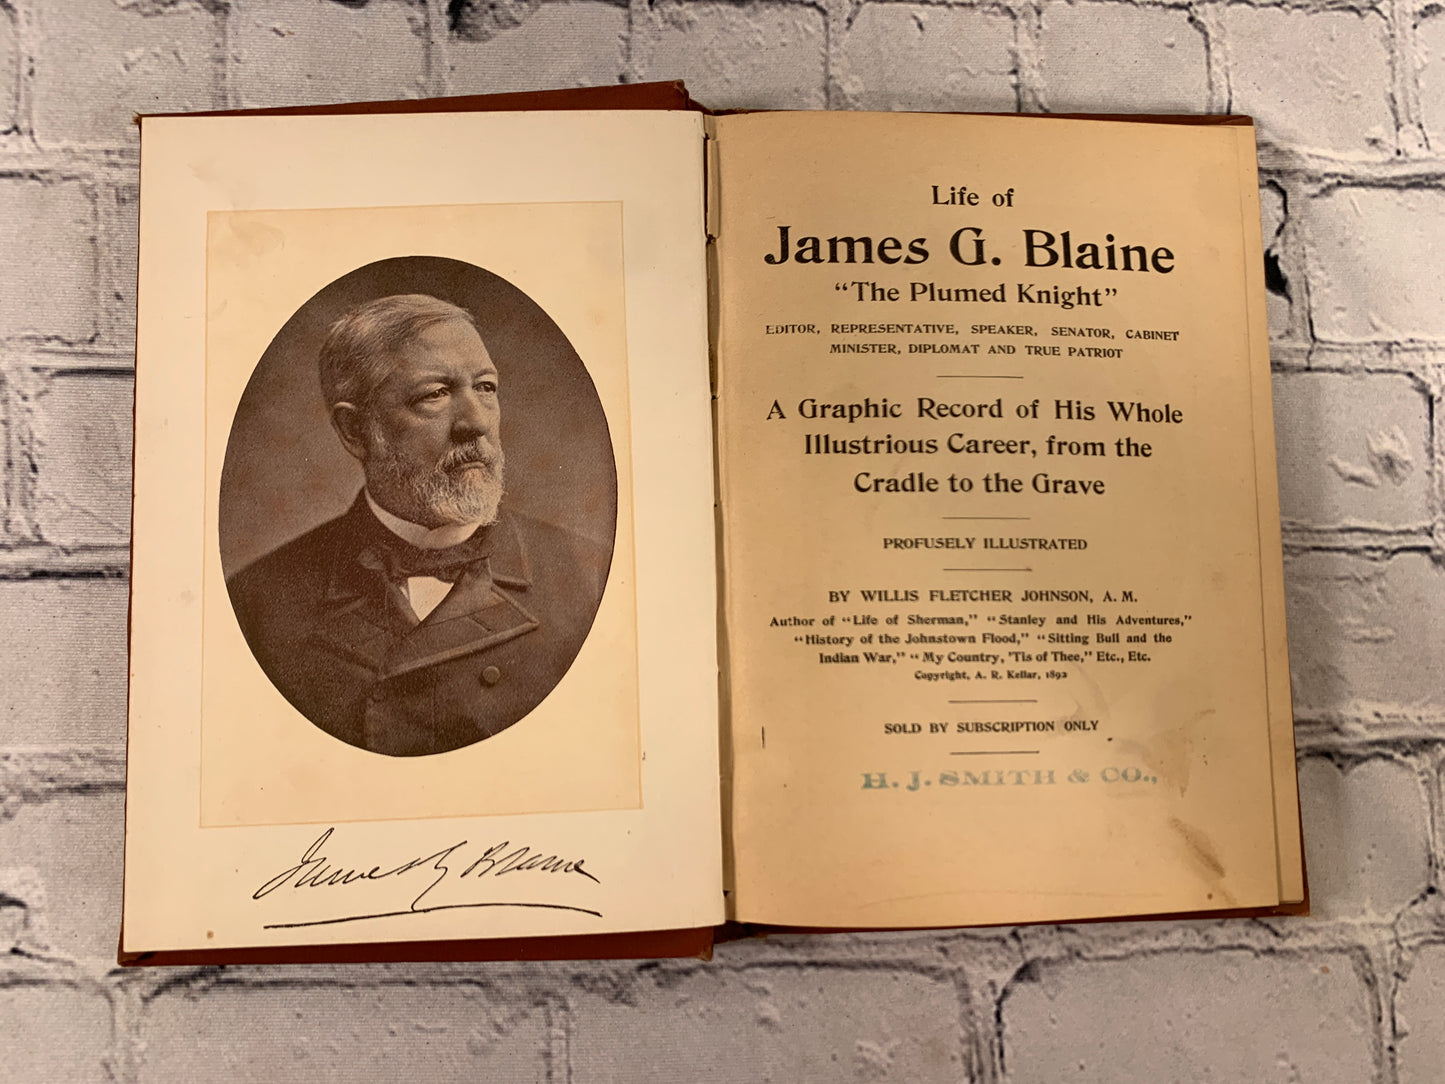 Life of James G. Blaine "The Plumed Knight" by Willis Johnson [1893]